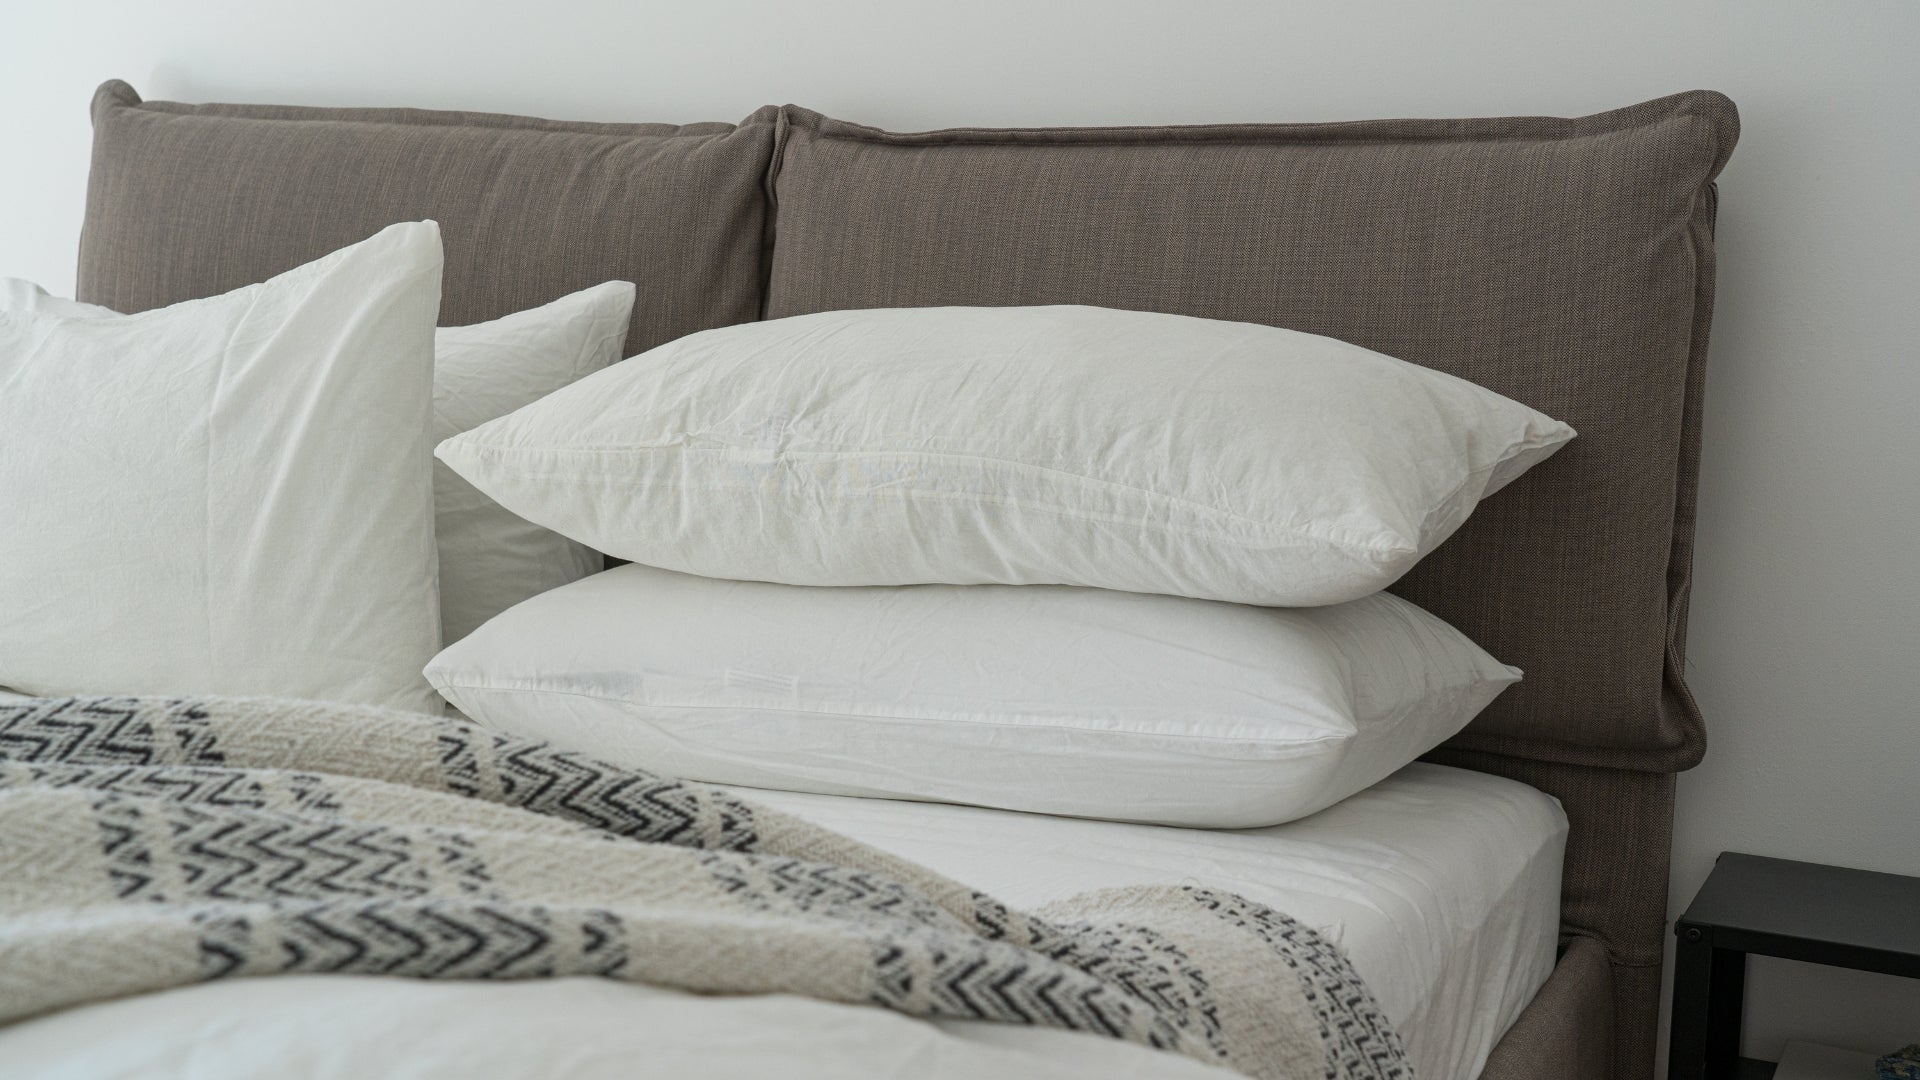 The Magic of Carbon-Infused Anti-Stress Pillows